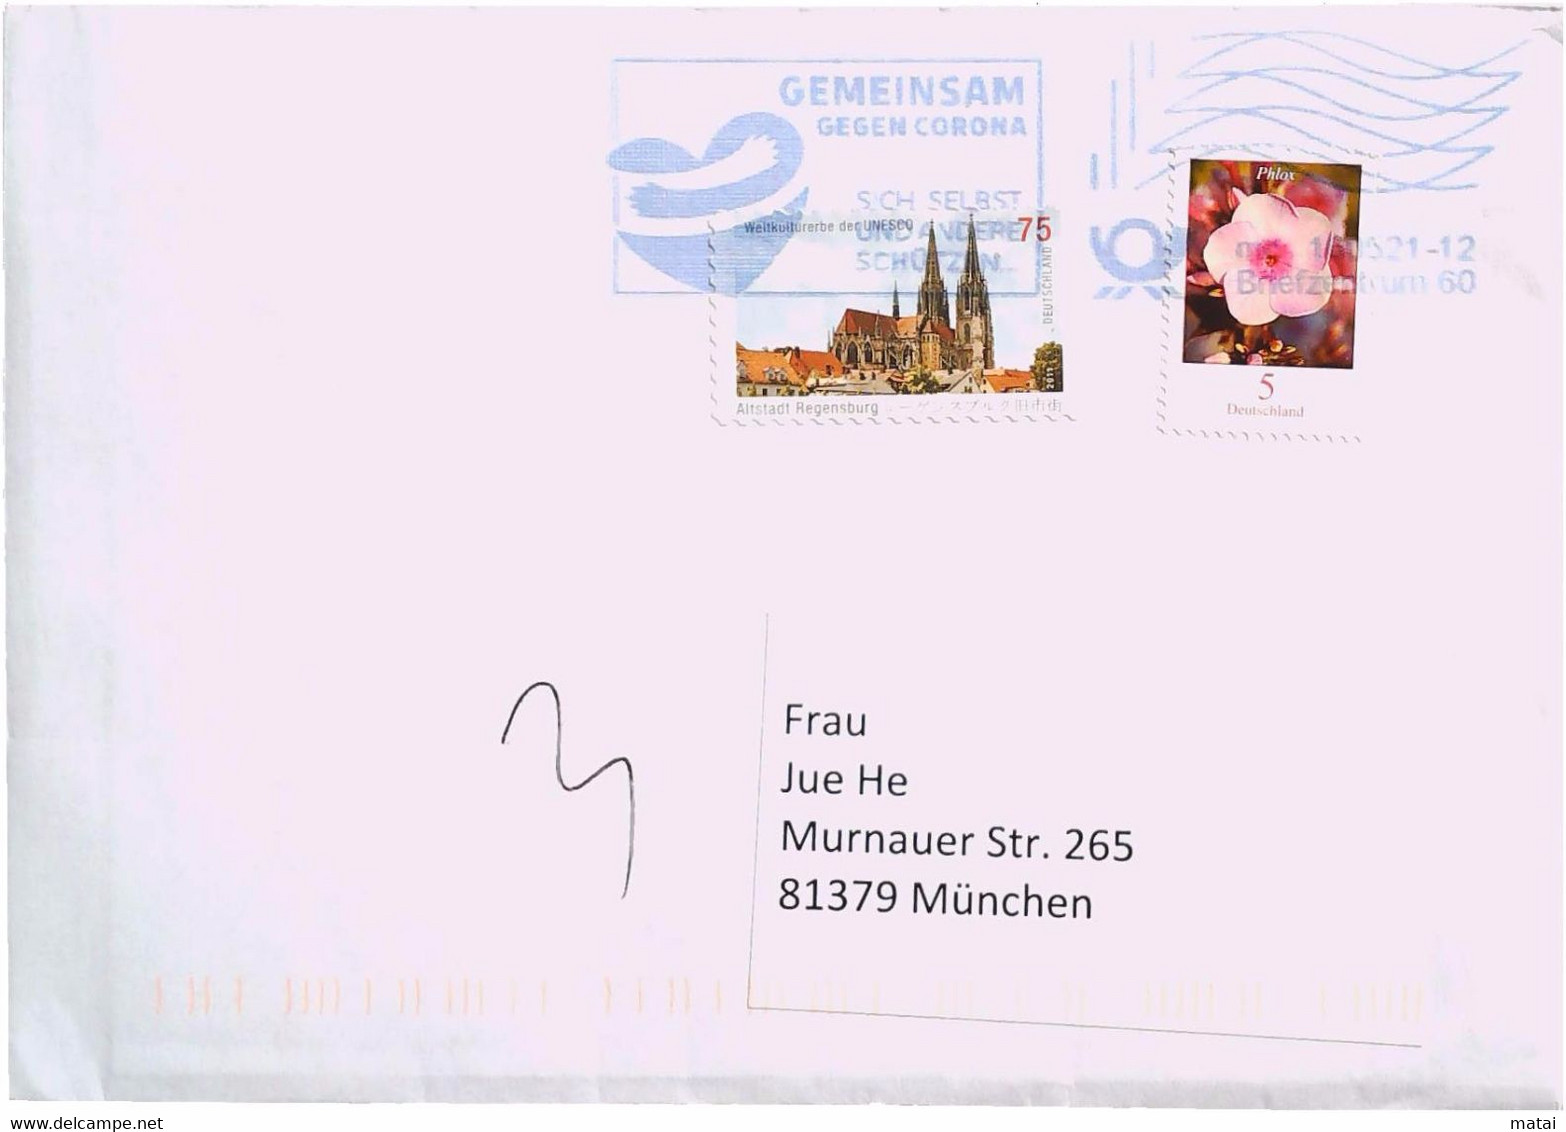 GERMANY COVER WITH  ANTI COVID-19 INFORMATION POSTMARK - Storia Postale